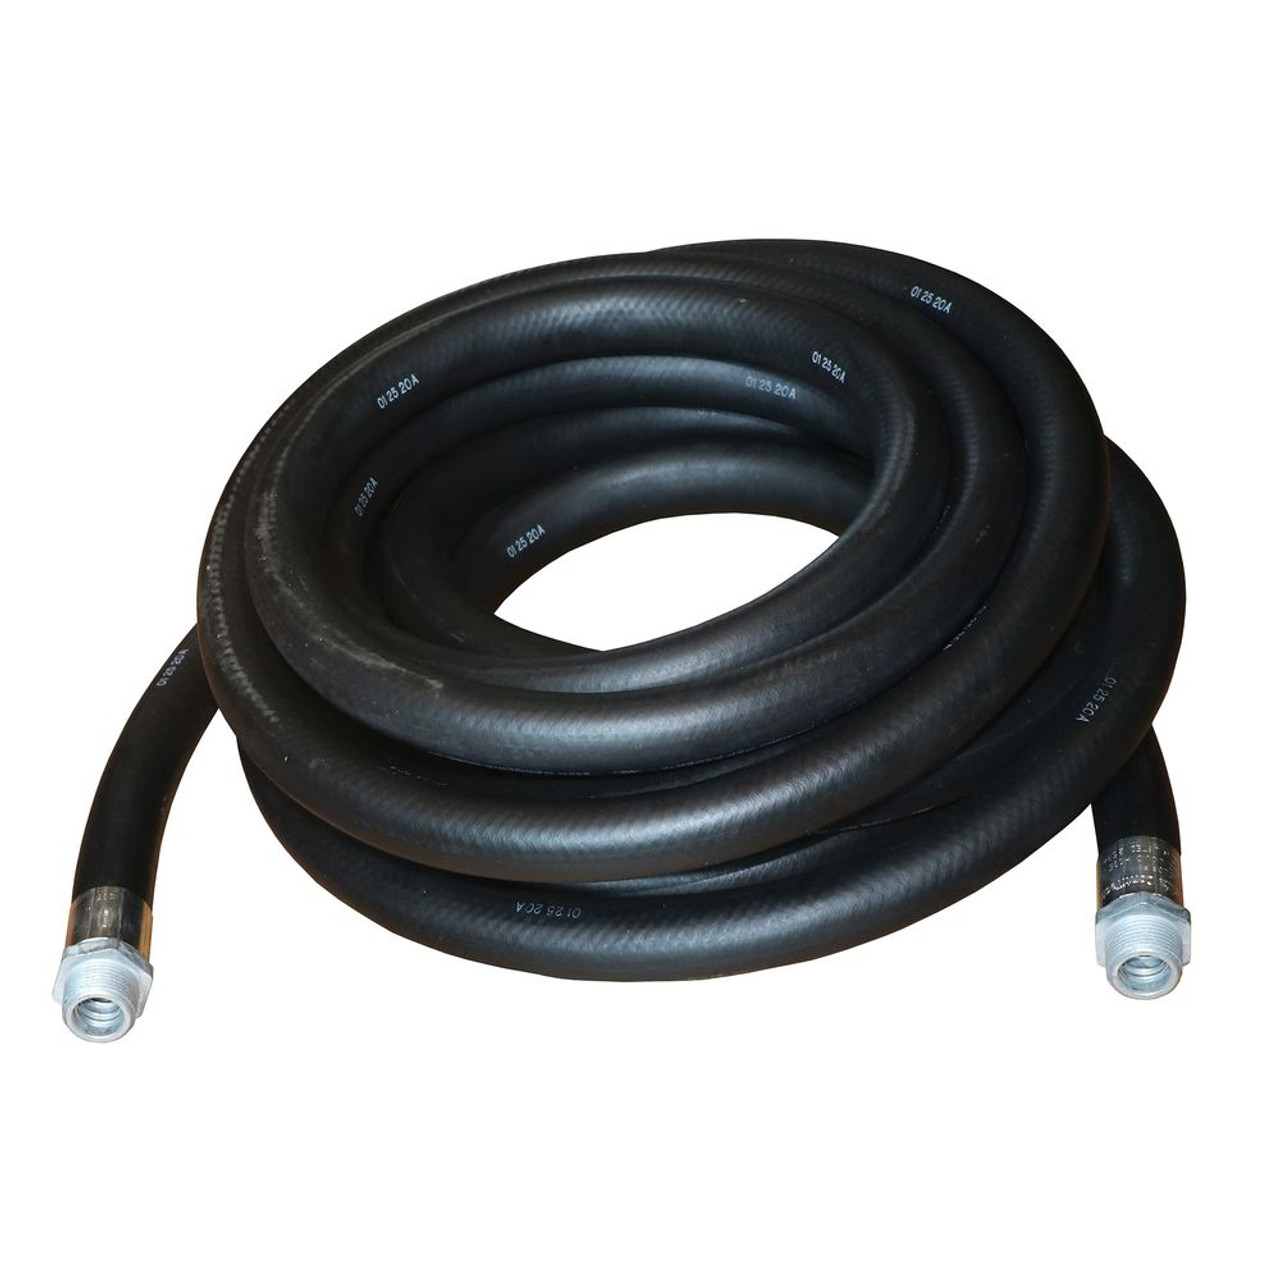 Reelcraft S600451-50 Low Pressure Fuel Hose 1 x 50 50psi